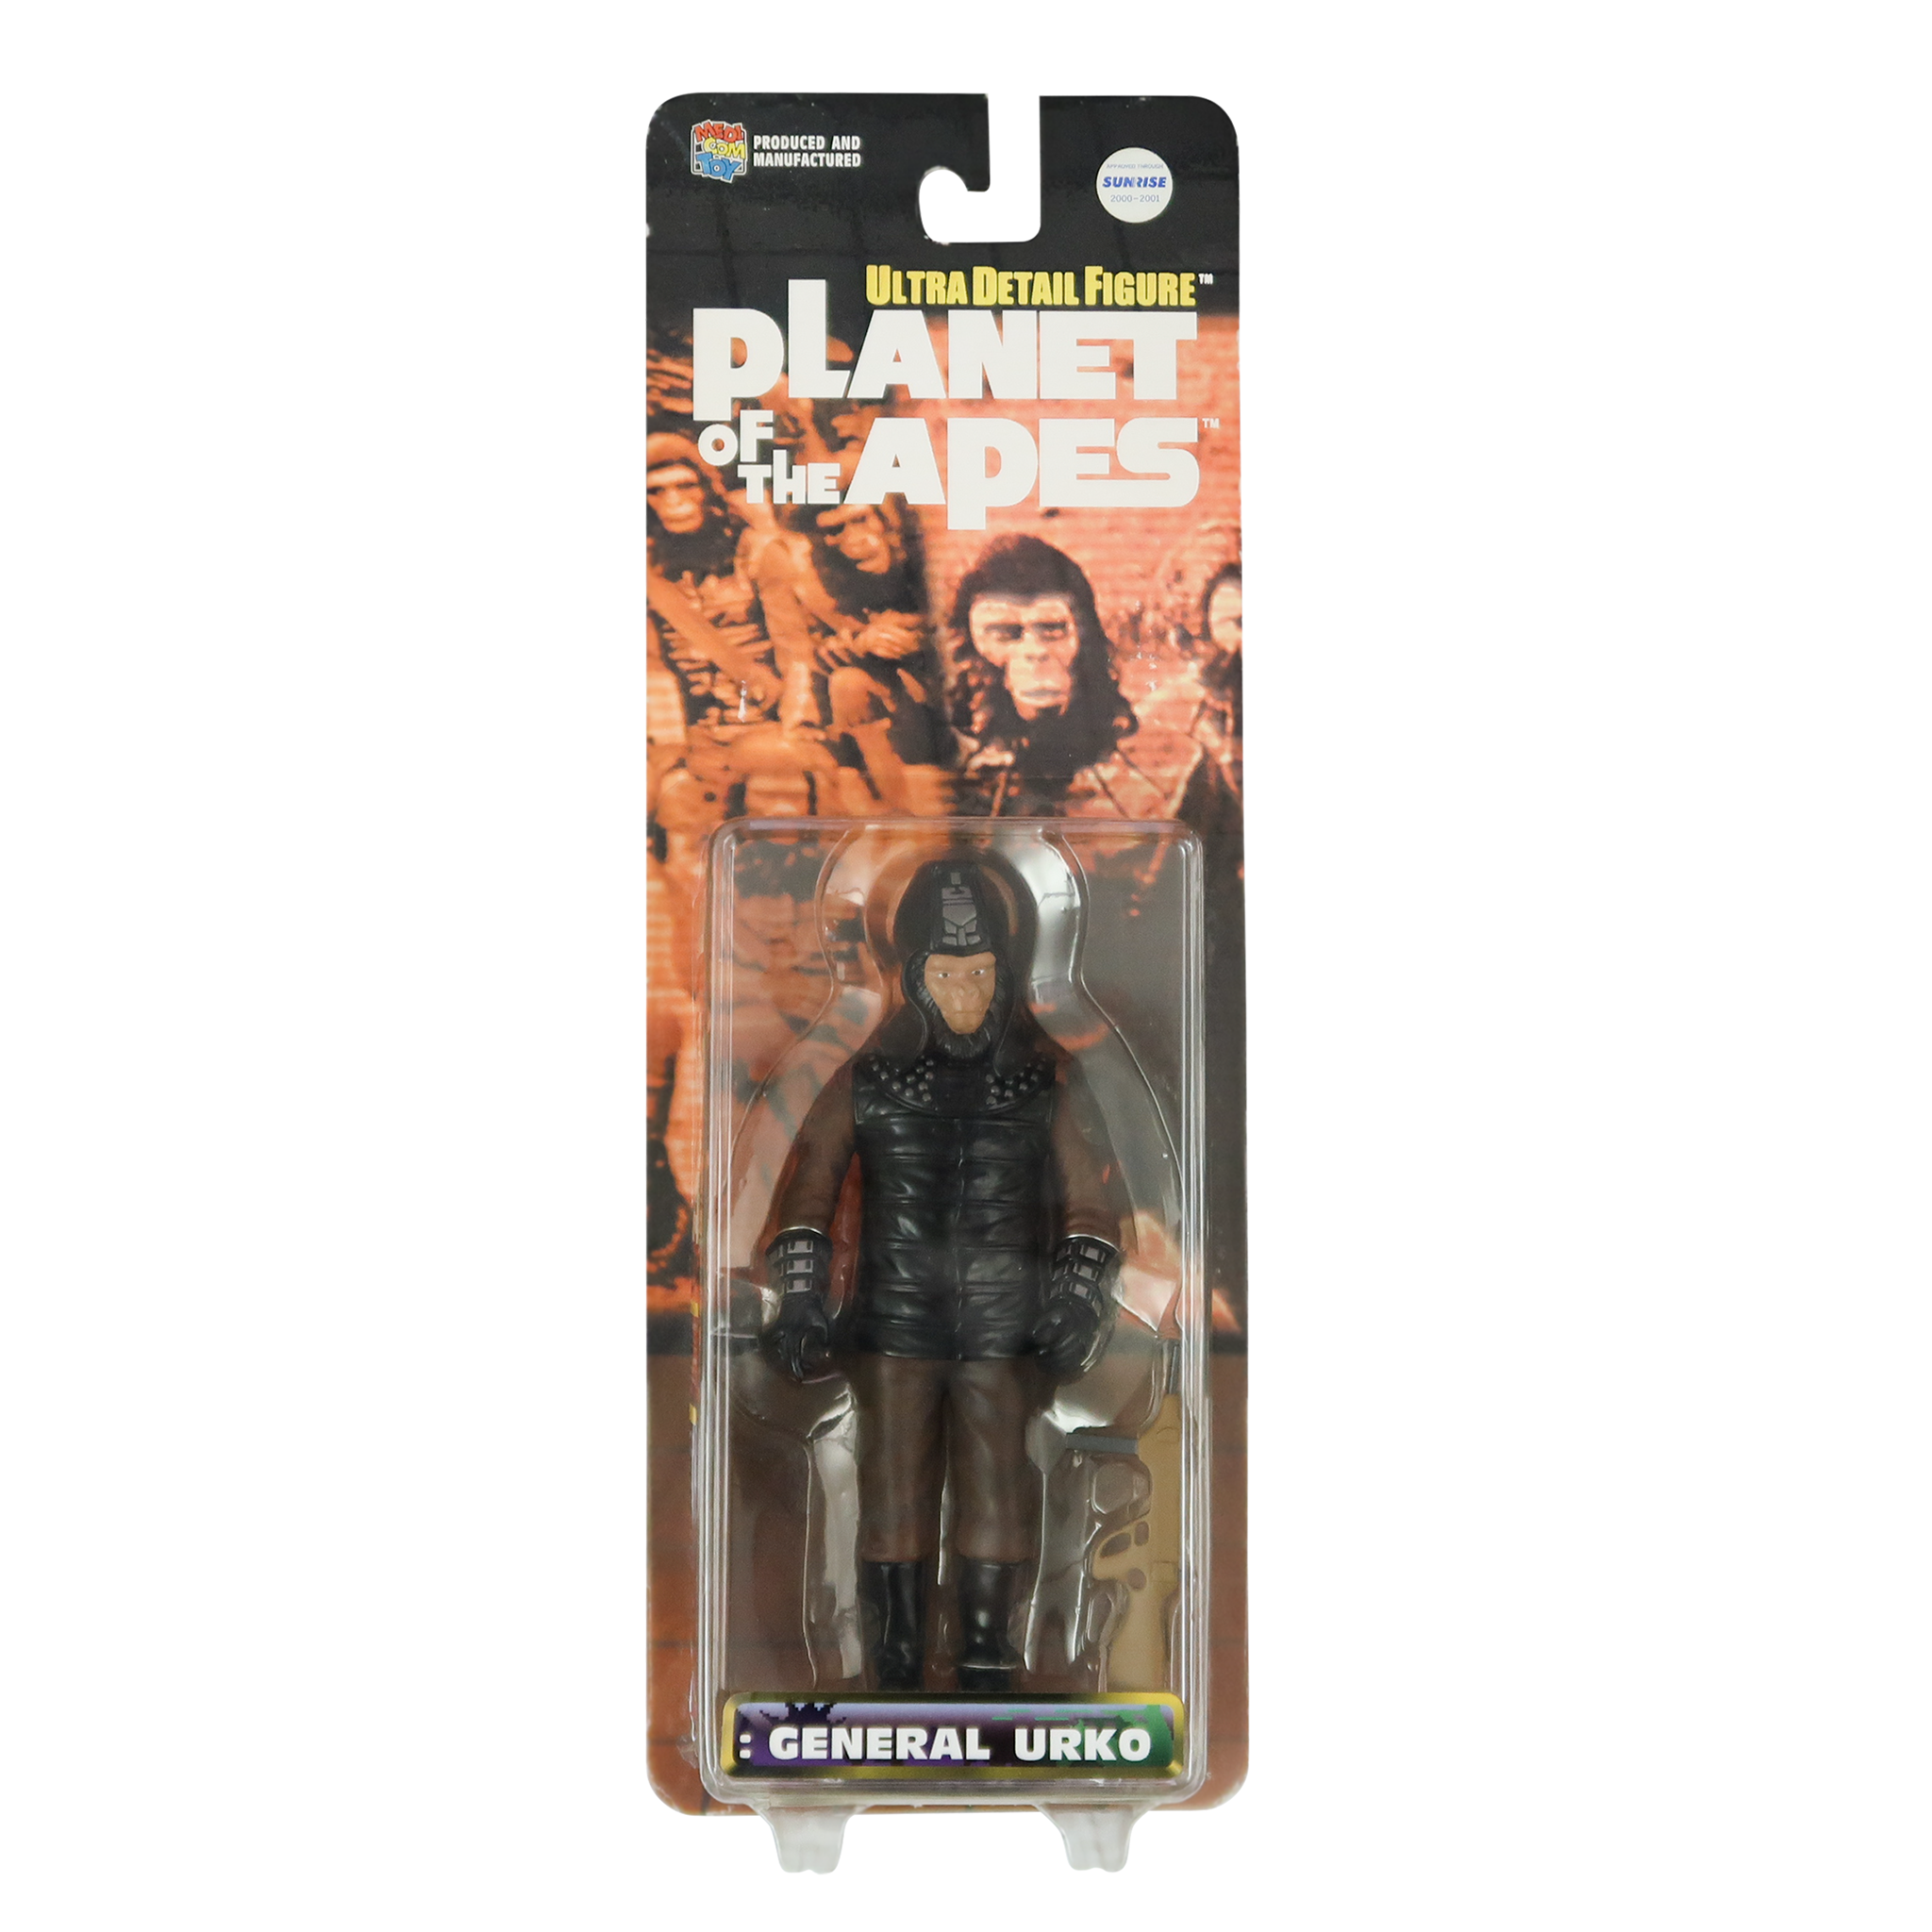 Planet of the Apes "General Urko" – Ultra Detail Figure (2000)